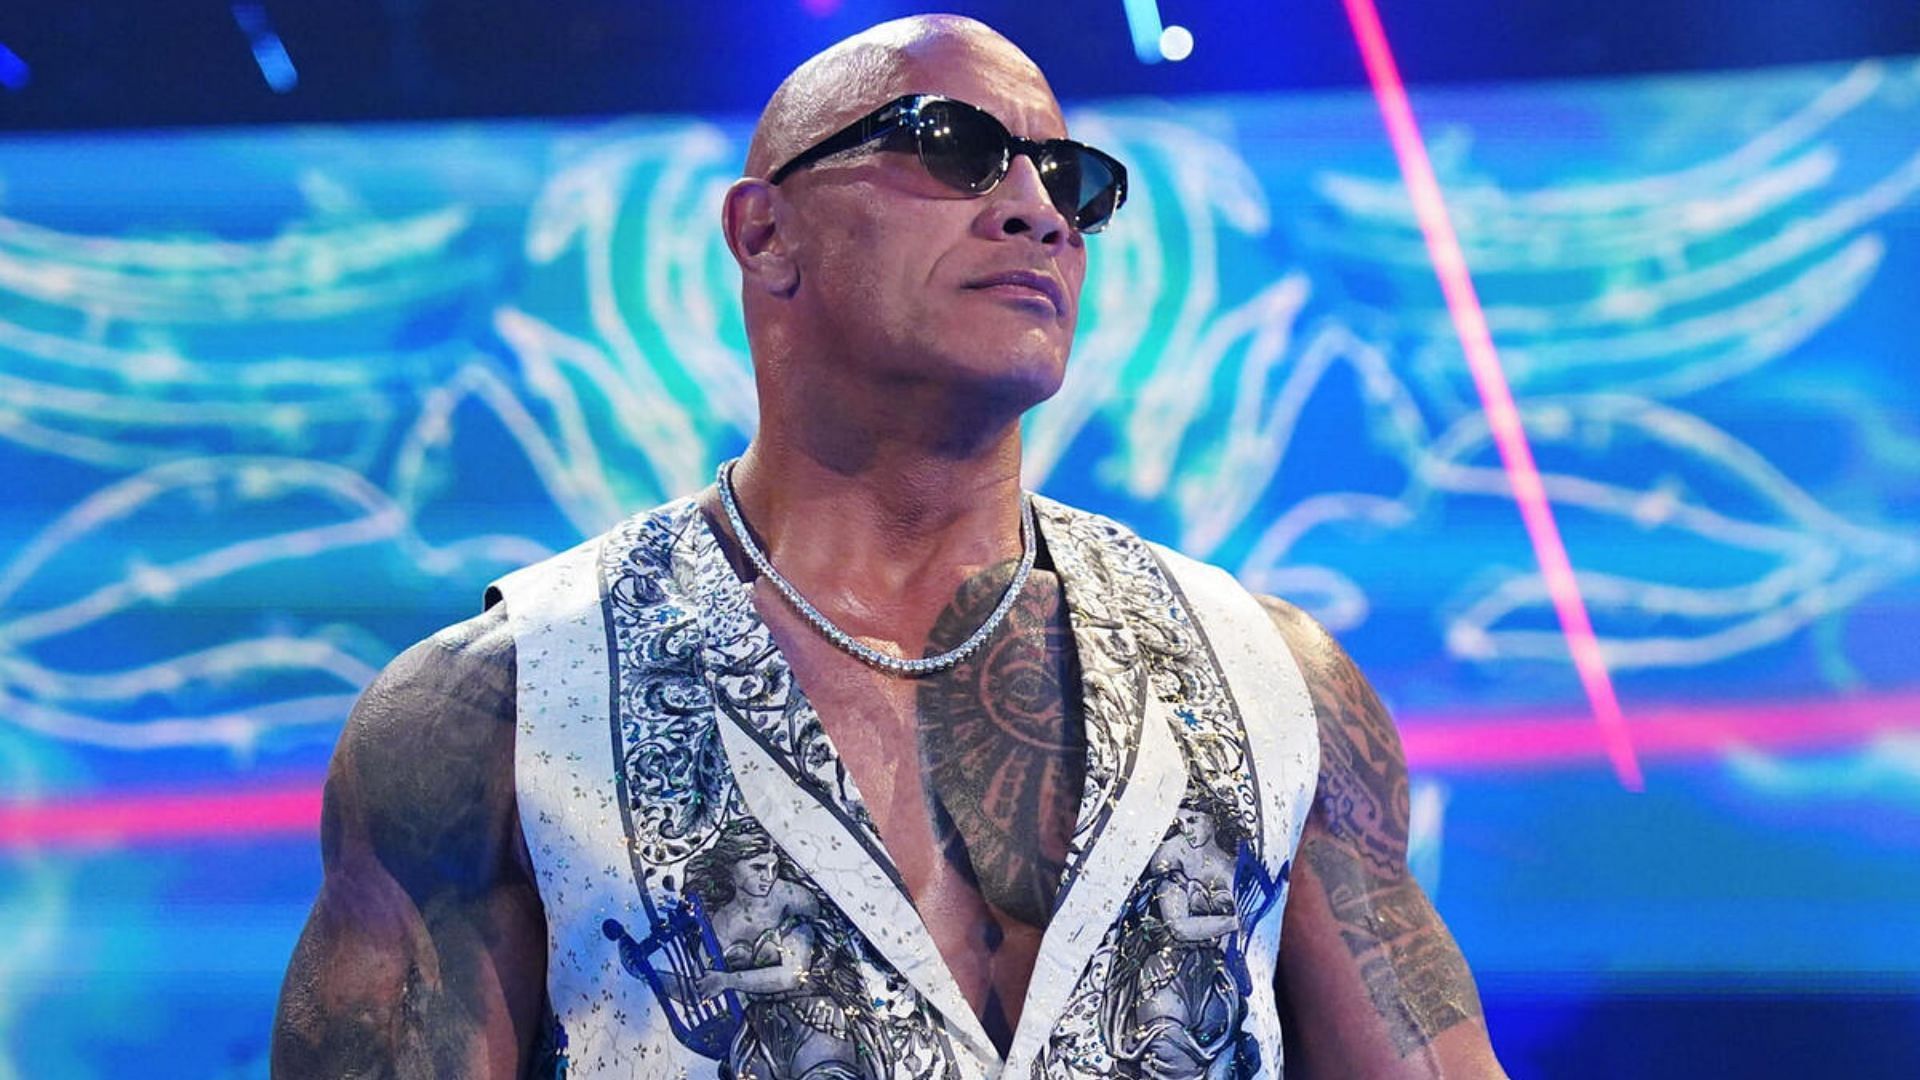 The Rock has made pro wrestling cool again